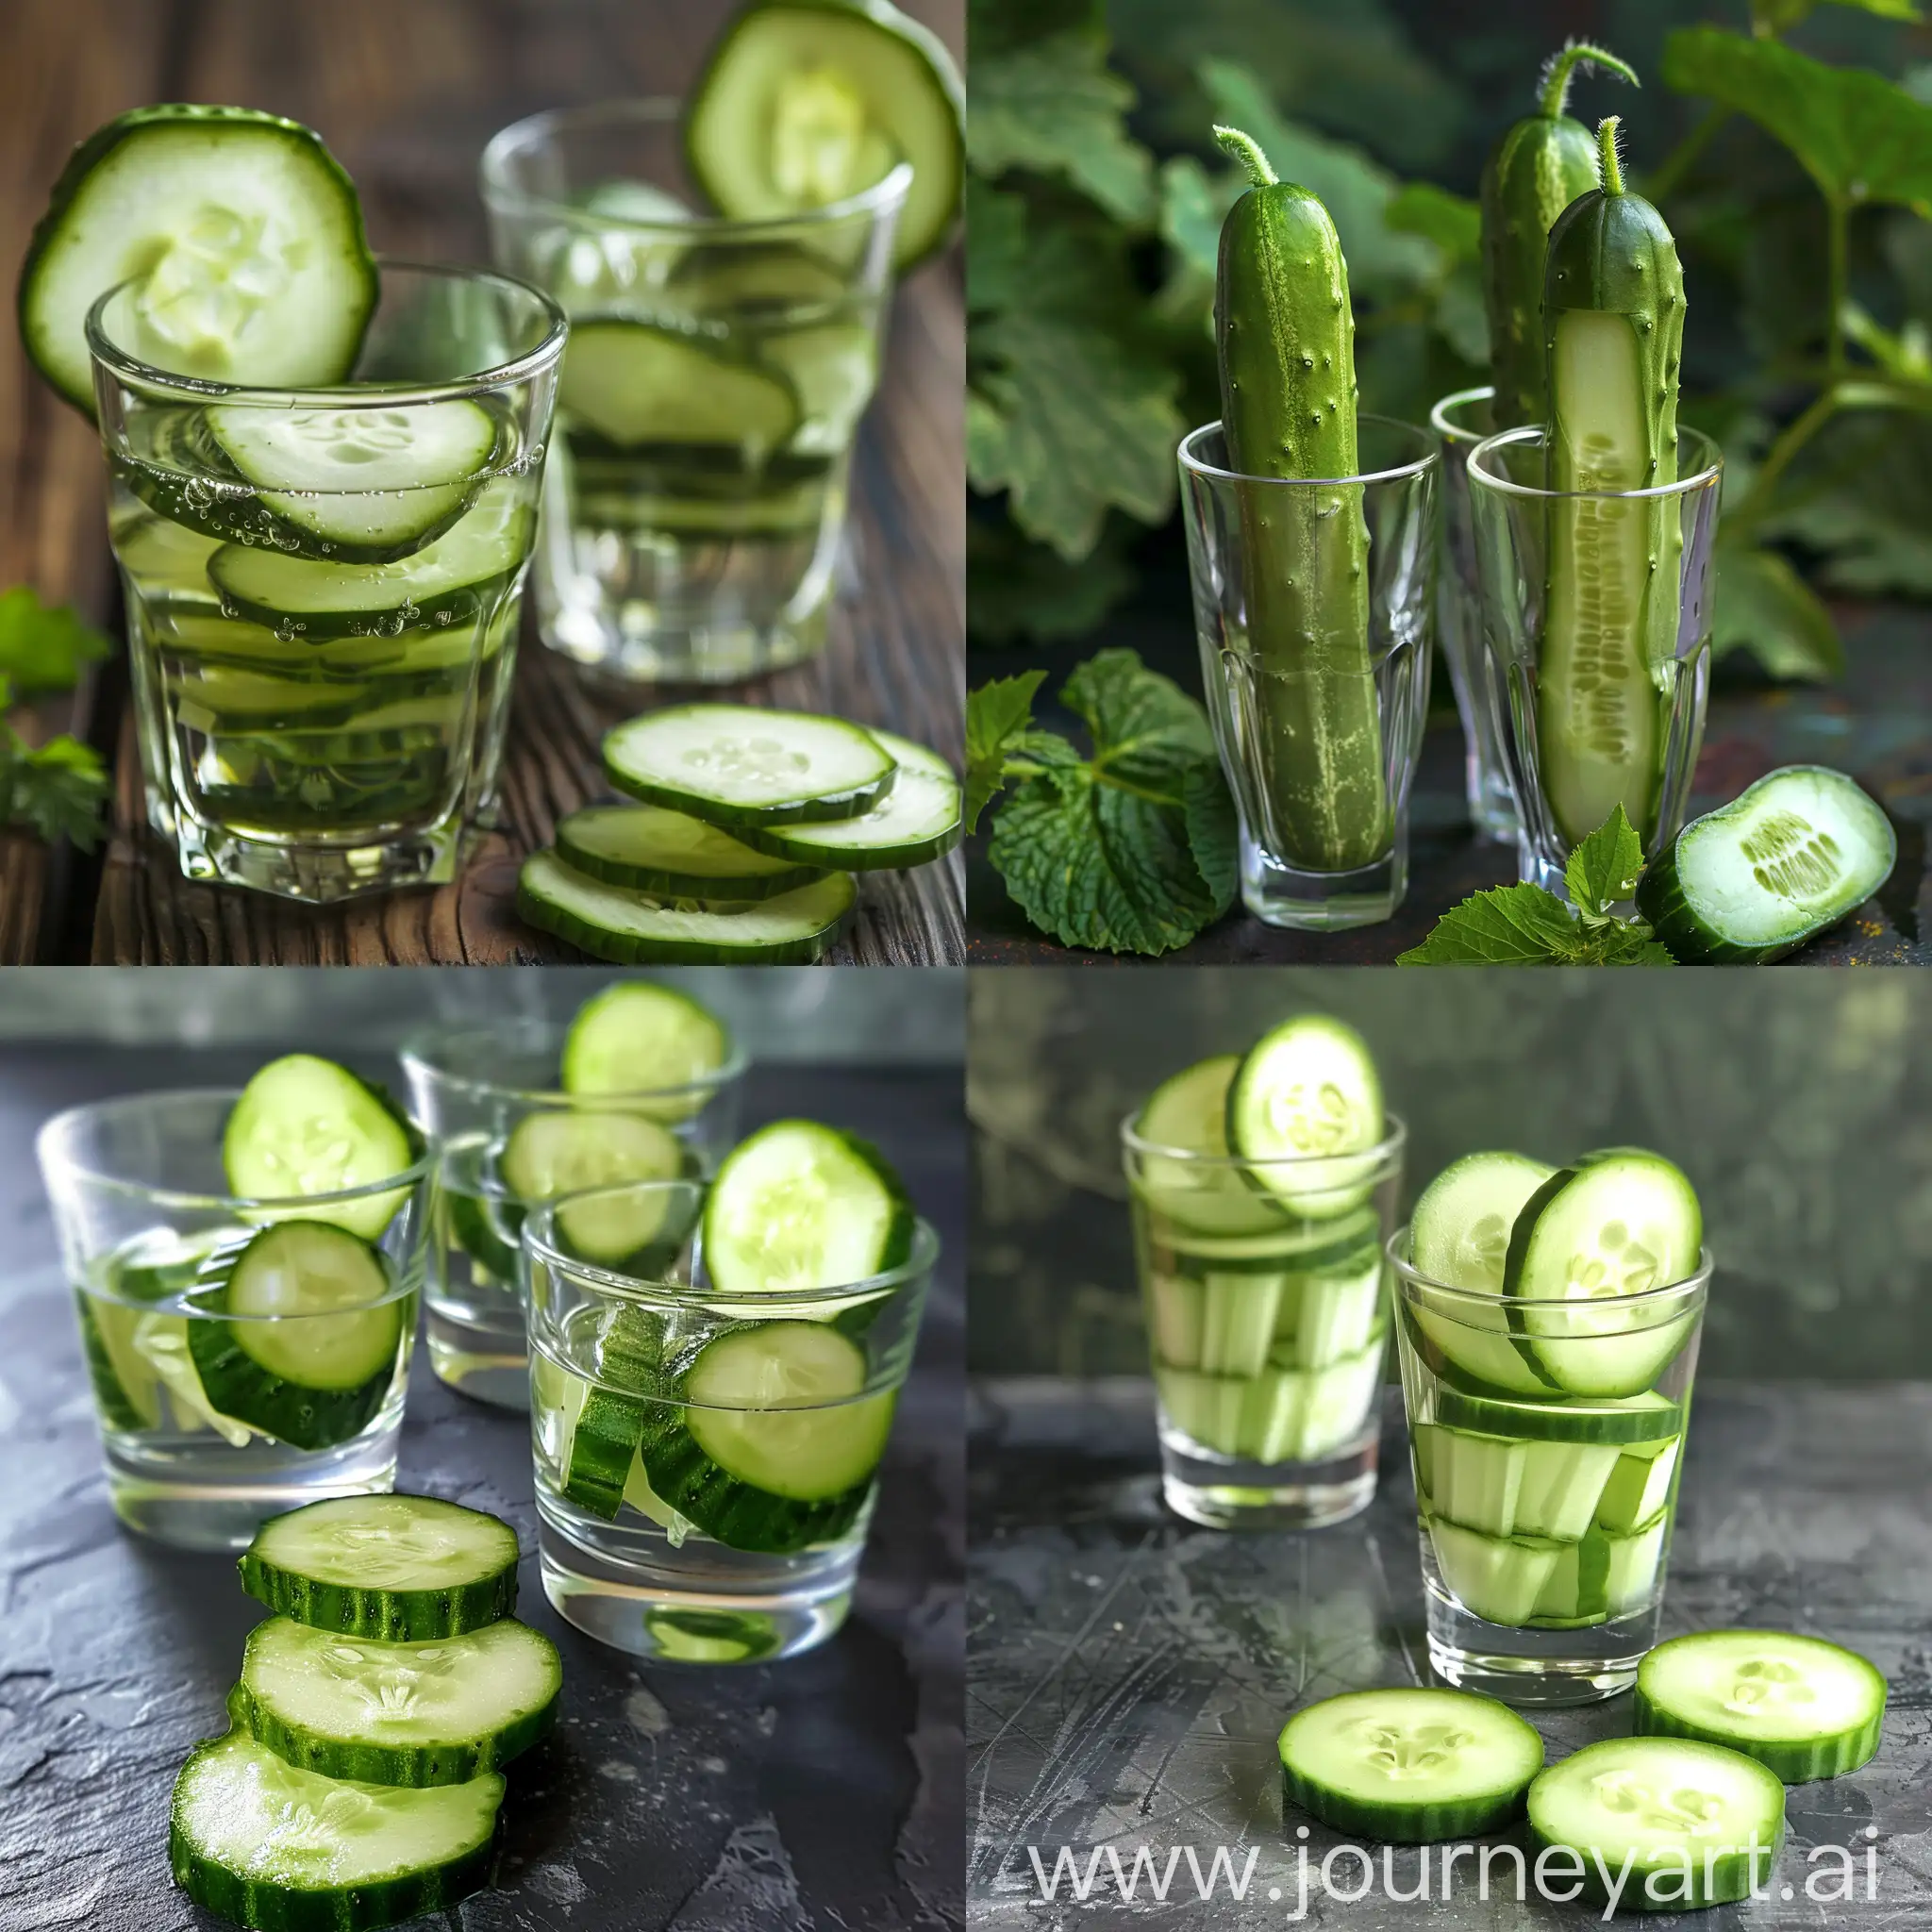 Cucumber-Playing-Bayan-in-Glasses-Whimsical-Musical-Cucumber-Art